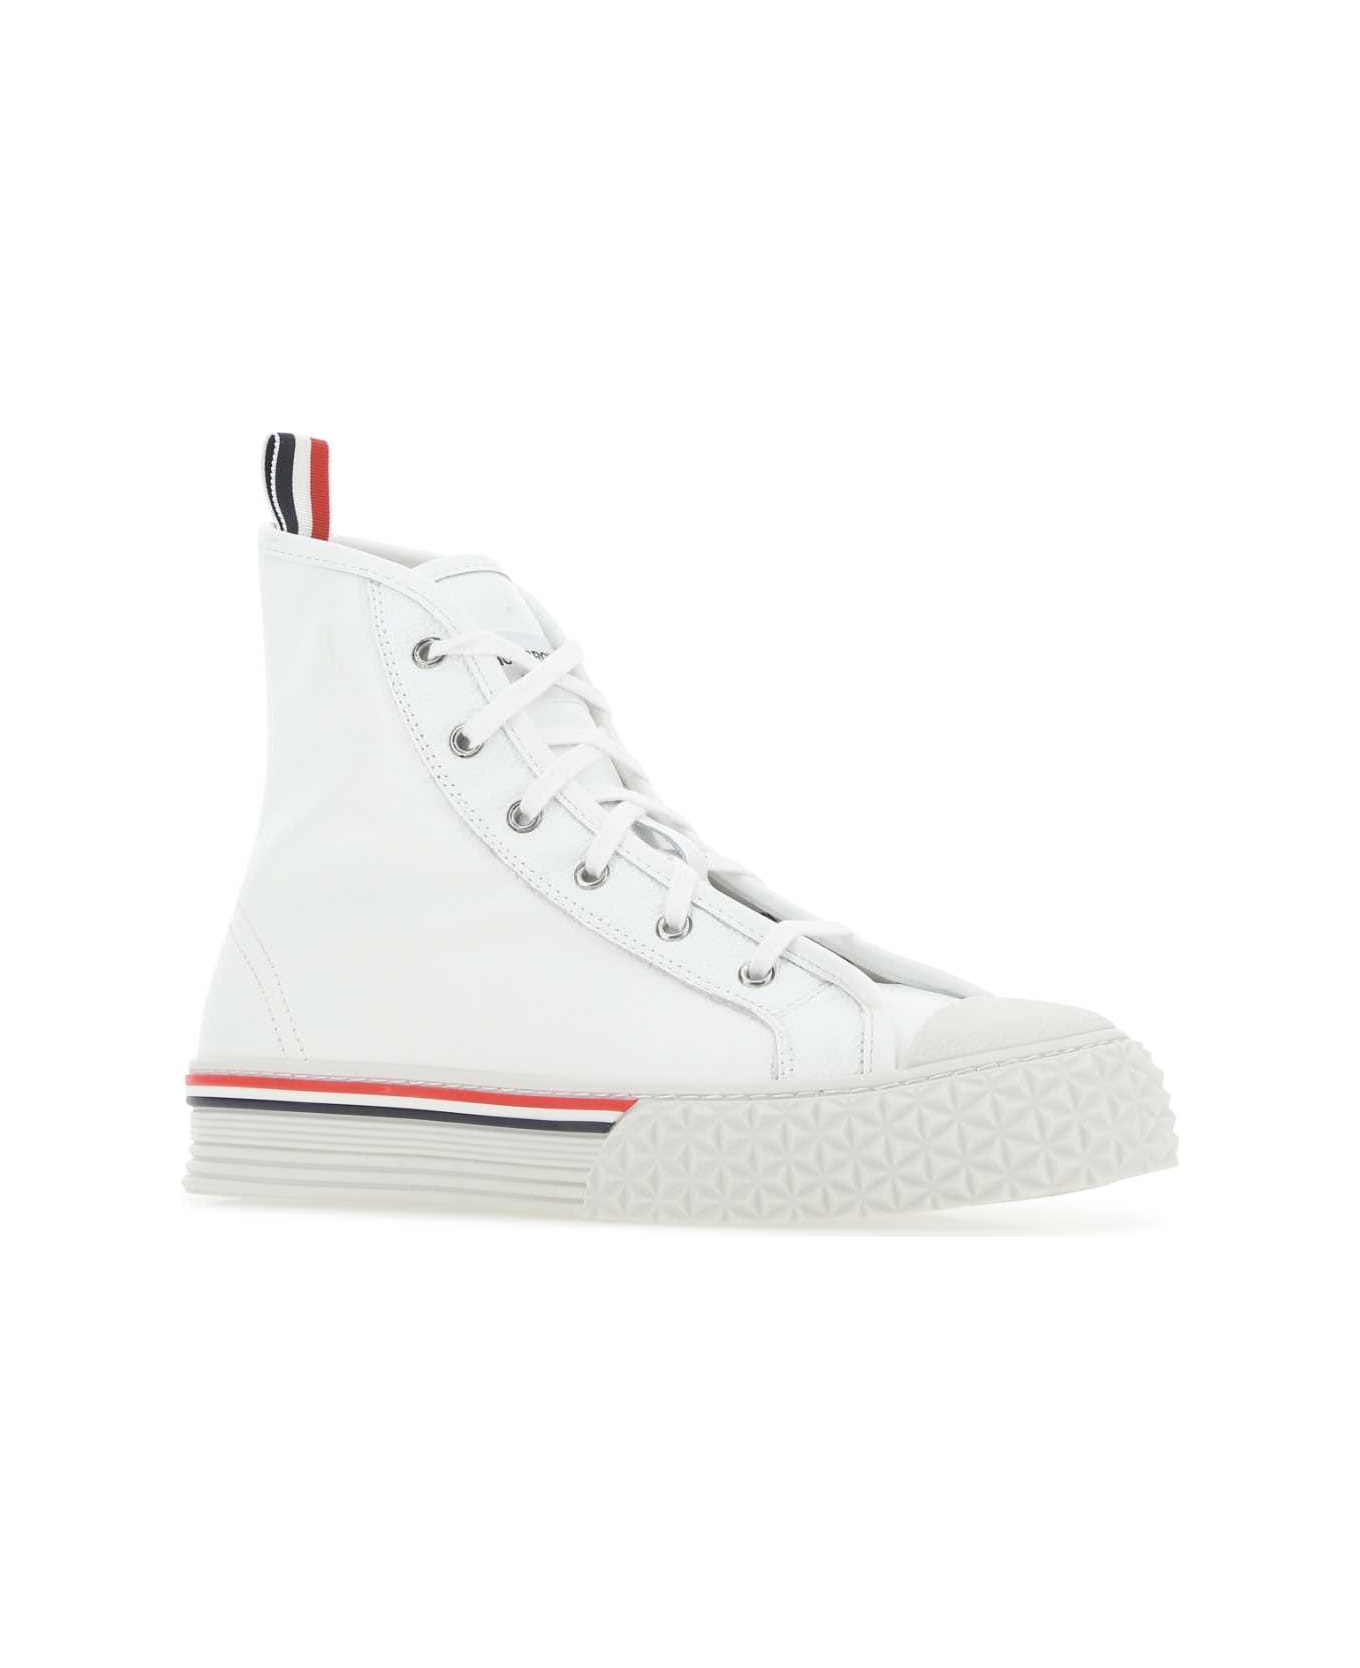 Thom Browne White Leather Collegiate Sneakers - 100 スニーカー